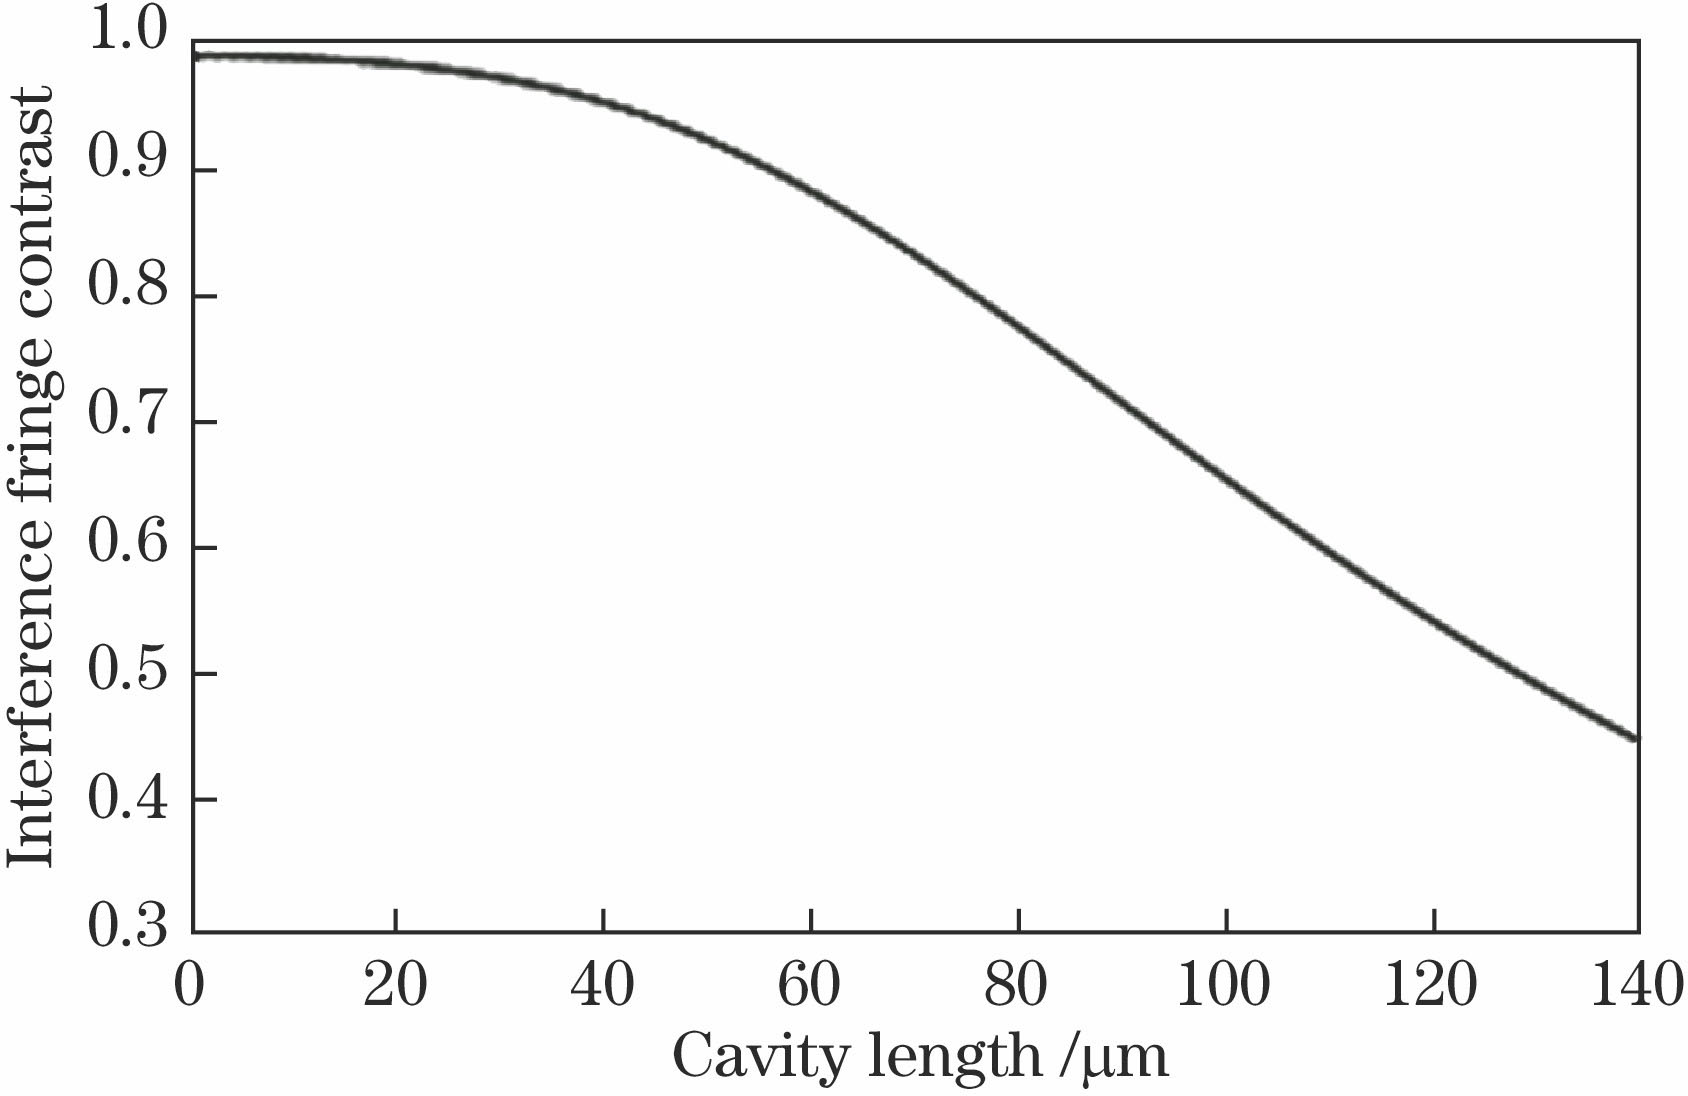 Variation curve of interference fringe contrast with cavity length